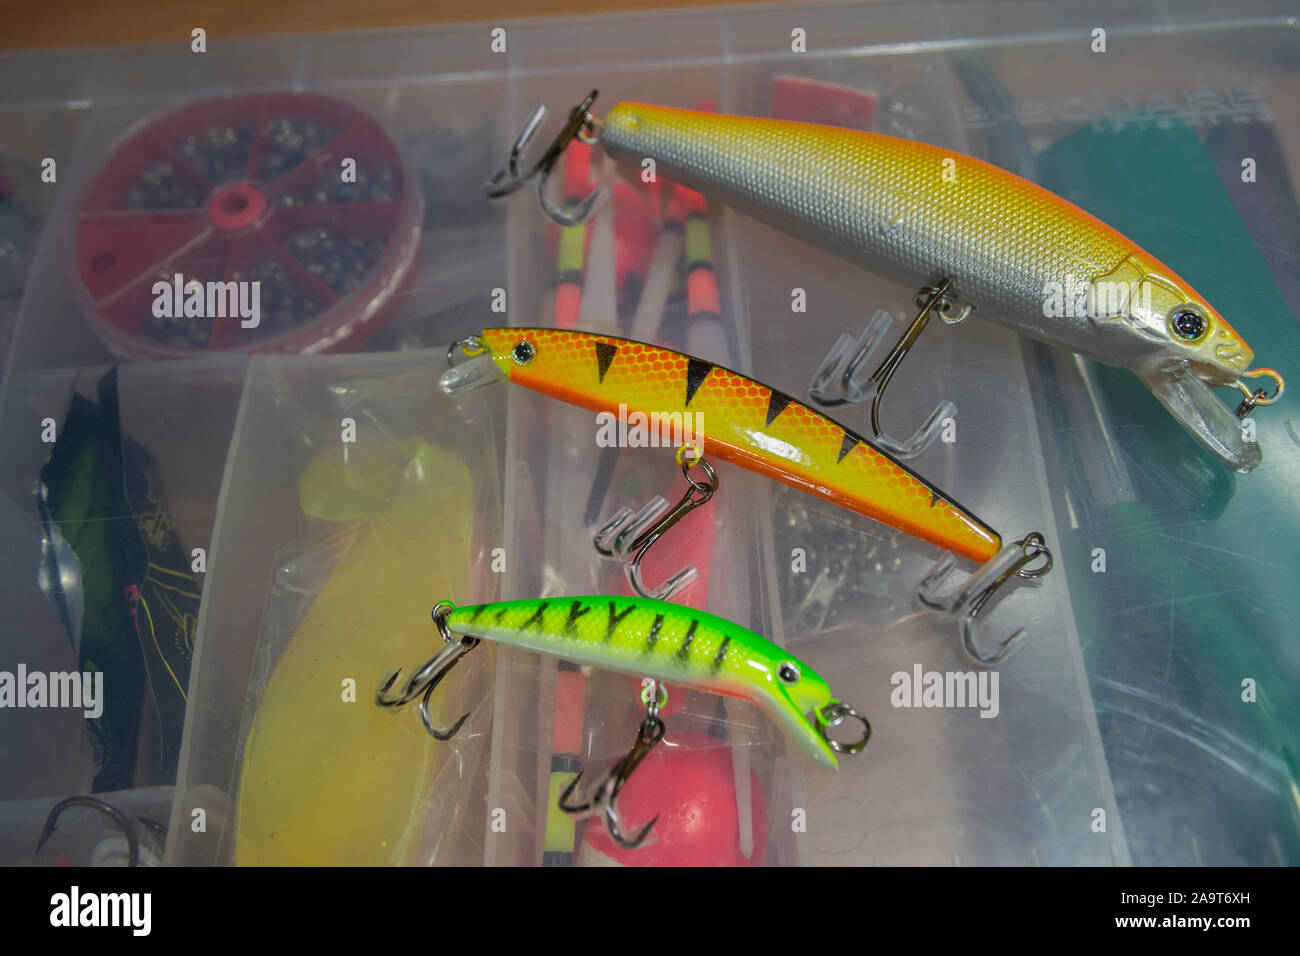 Fishing Tackle Box High Resolution Stock Photography and Images - Alamy